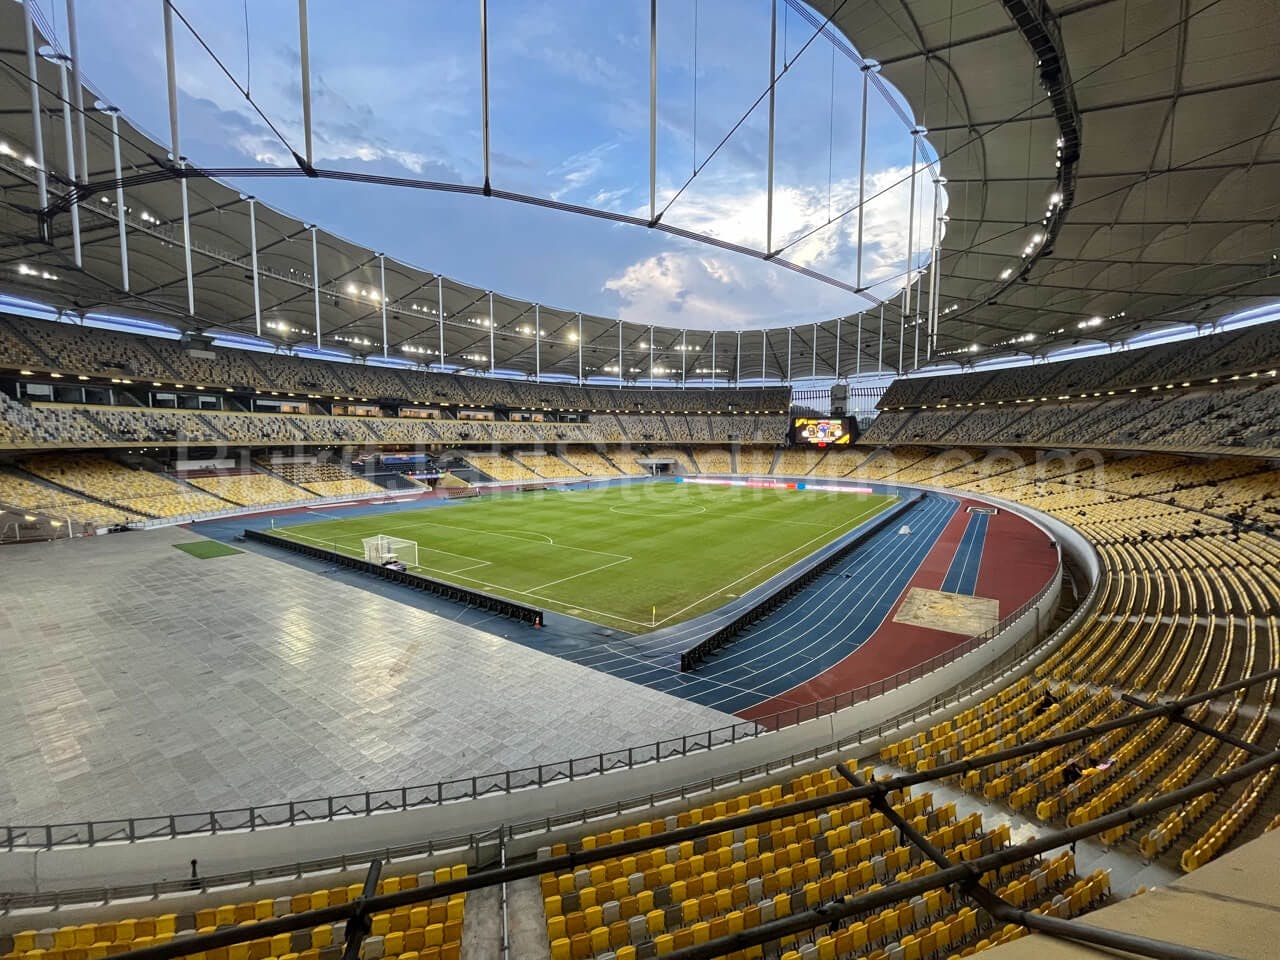 0.5x View of Bukit Jalil field from section 217 of Stadium Bukit Jalil.